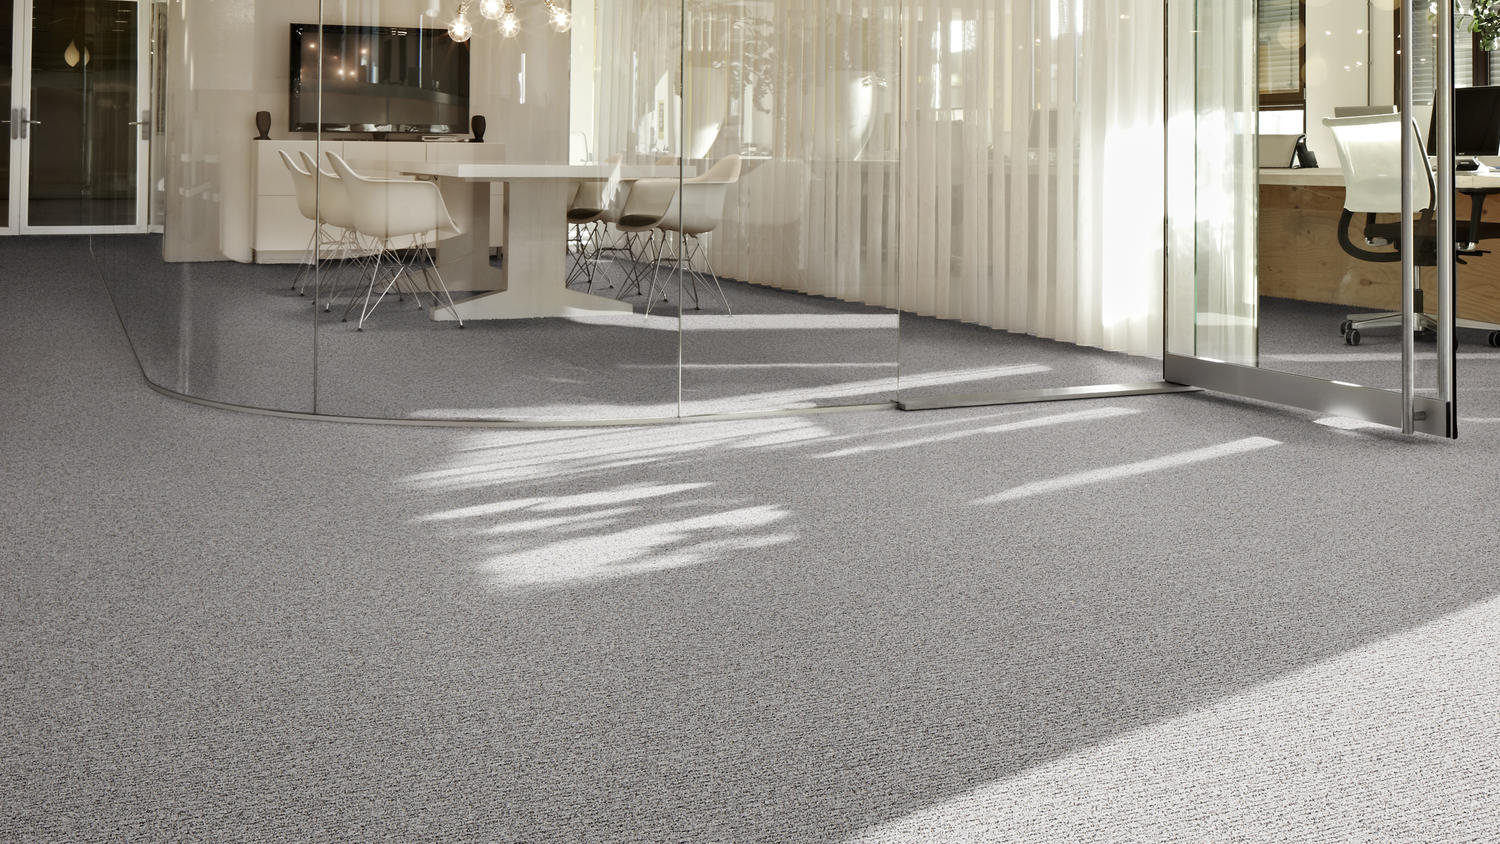 Desso Stratos Carpet Tiles Used In A Conference Room & Hallway